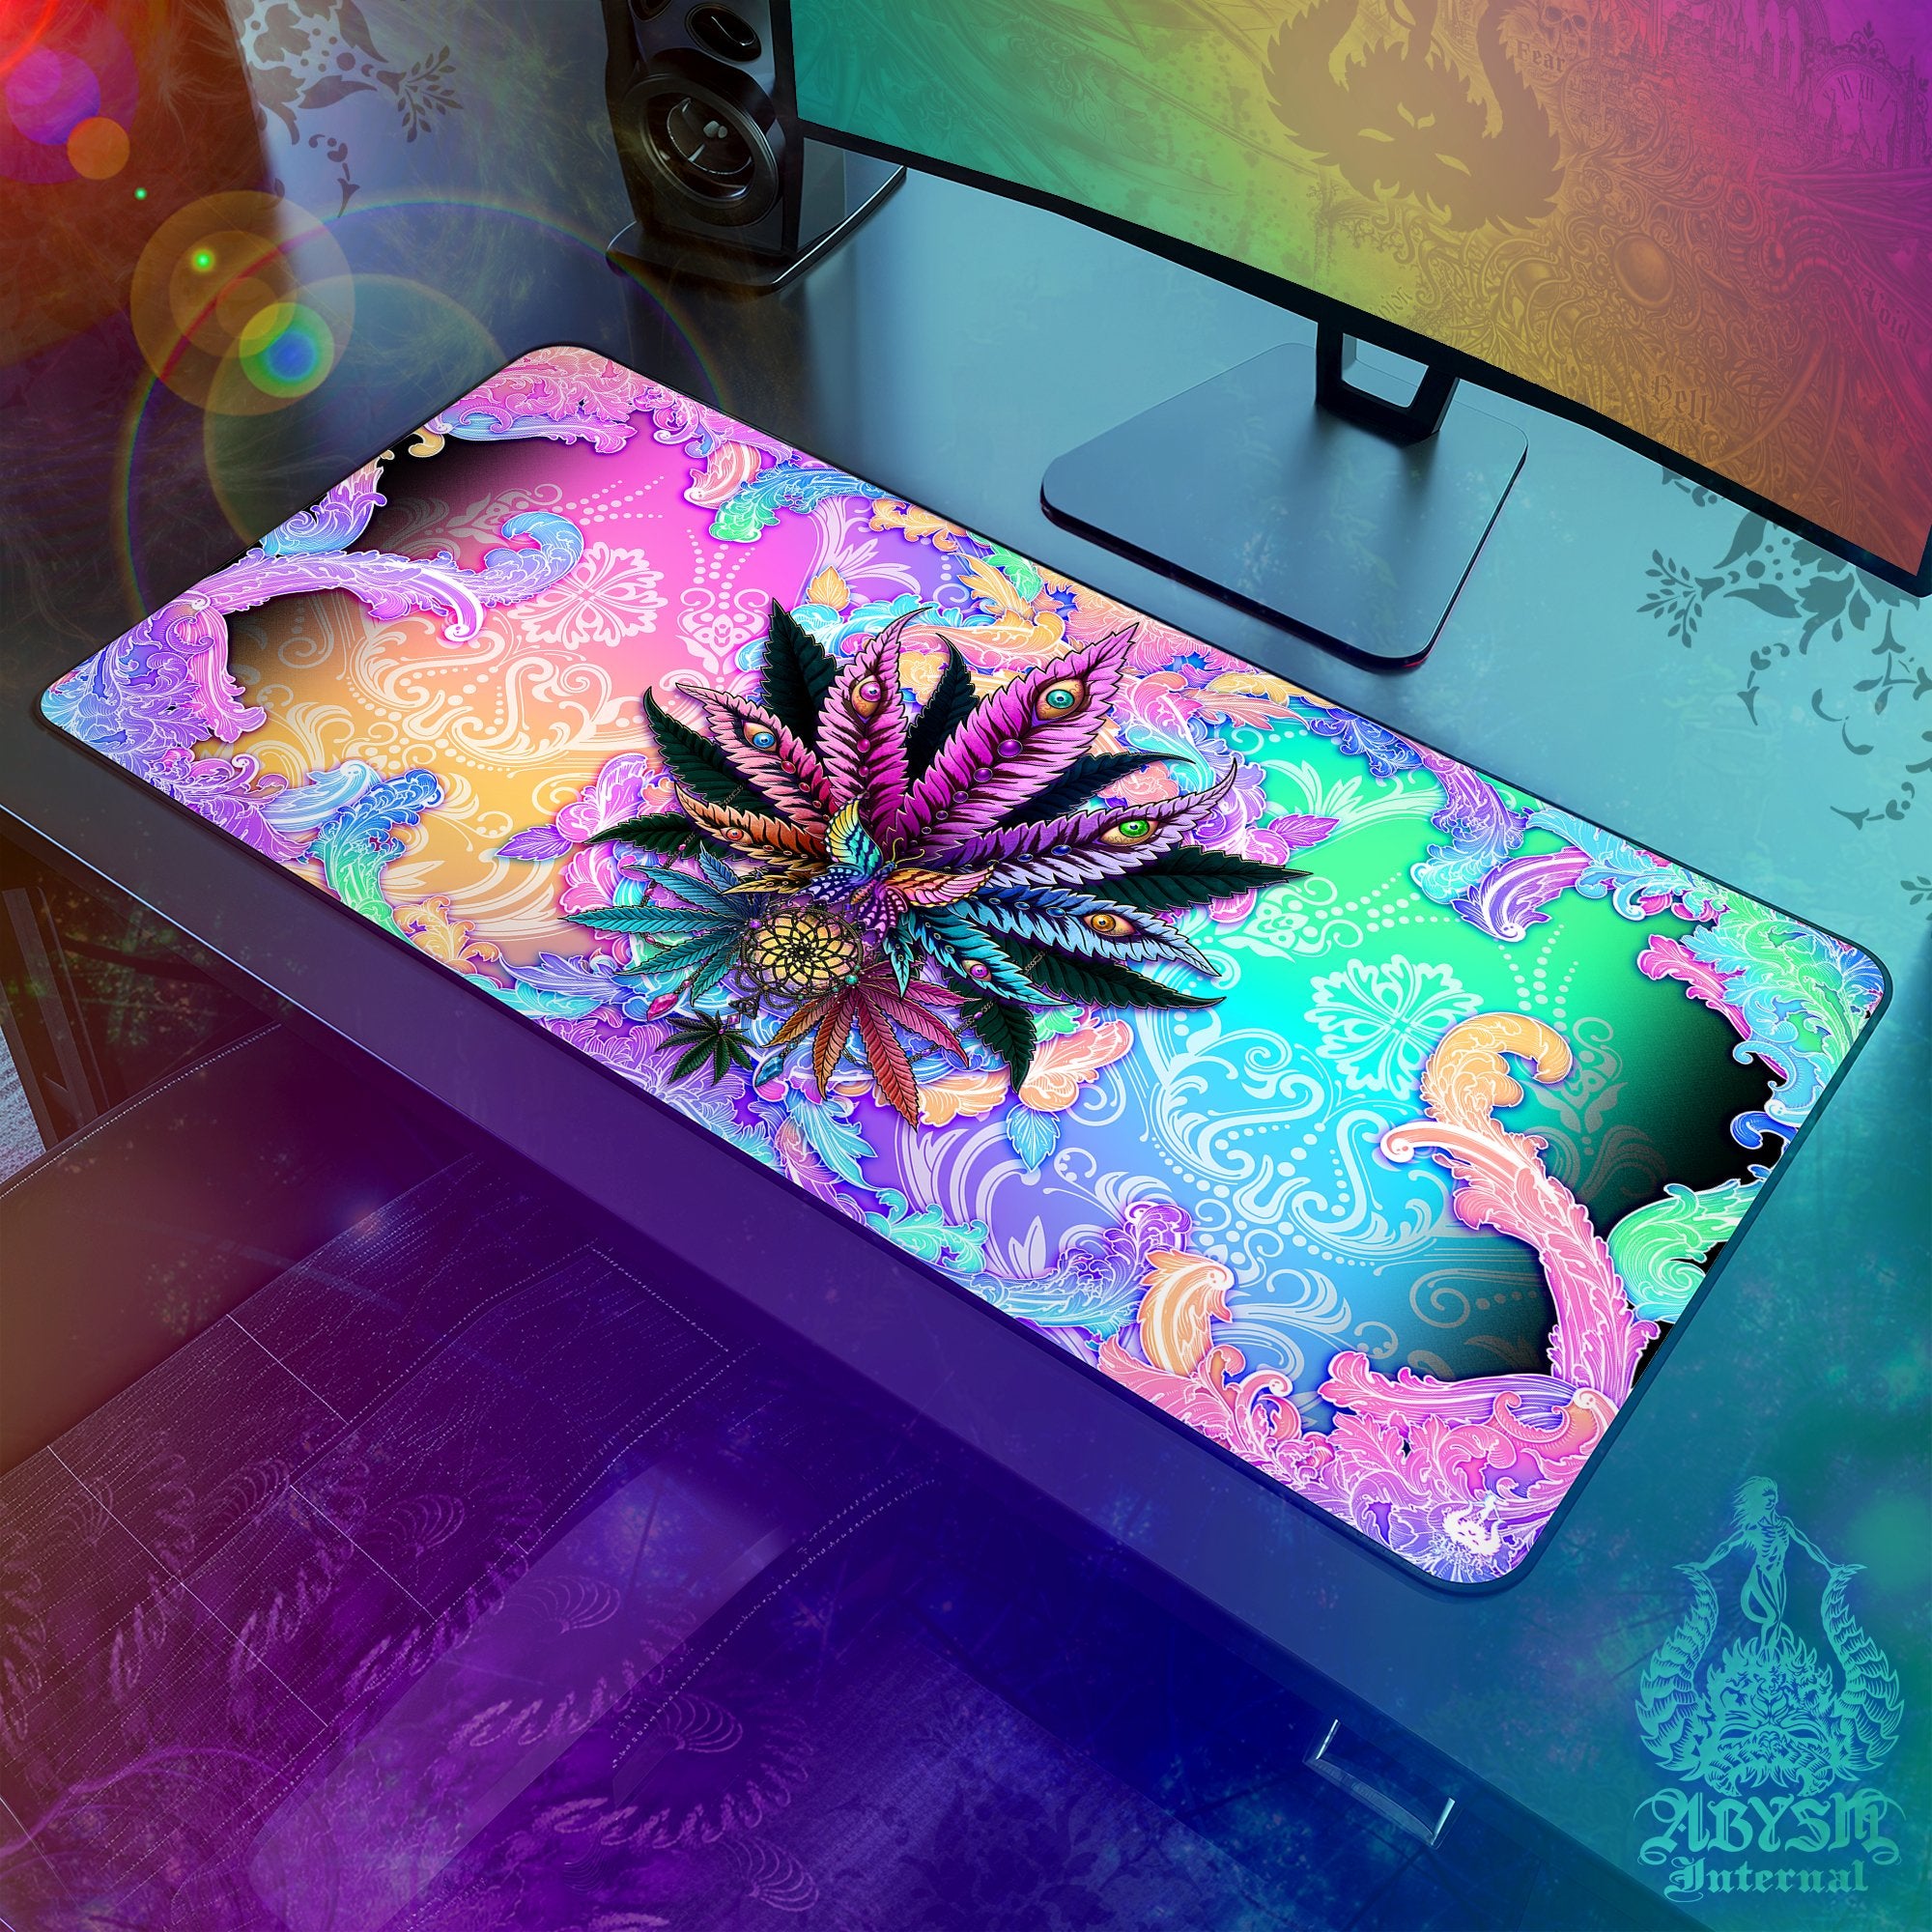 Pastel Gaming Desk Mat, Marijuana Mouse Pad, Psychedelic Cannabis Table Protector Cover, Weed Workpad, 420 Art Print - Black - Abysm Internal